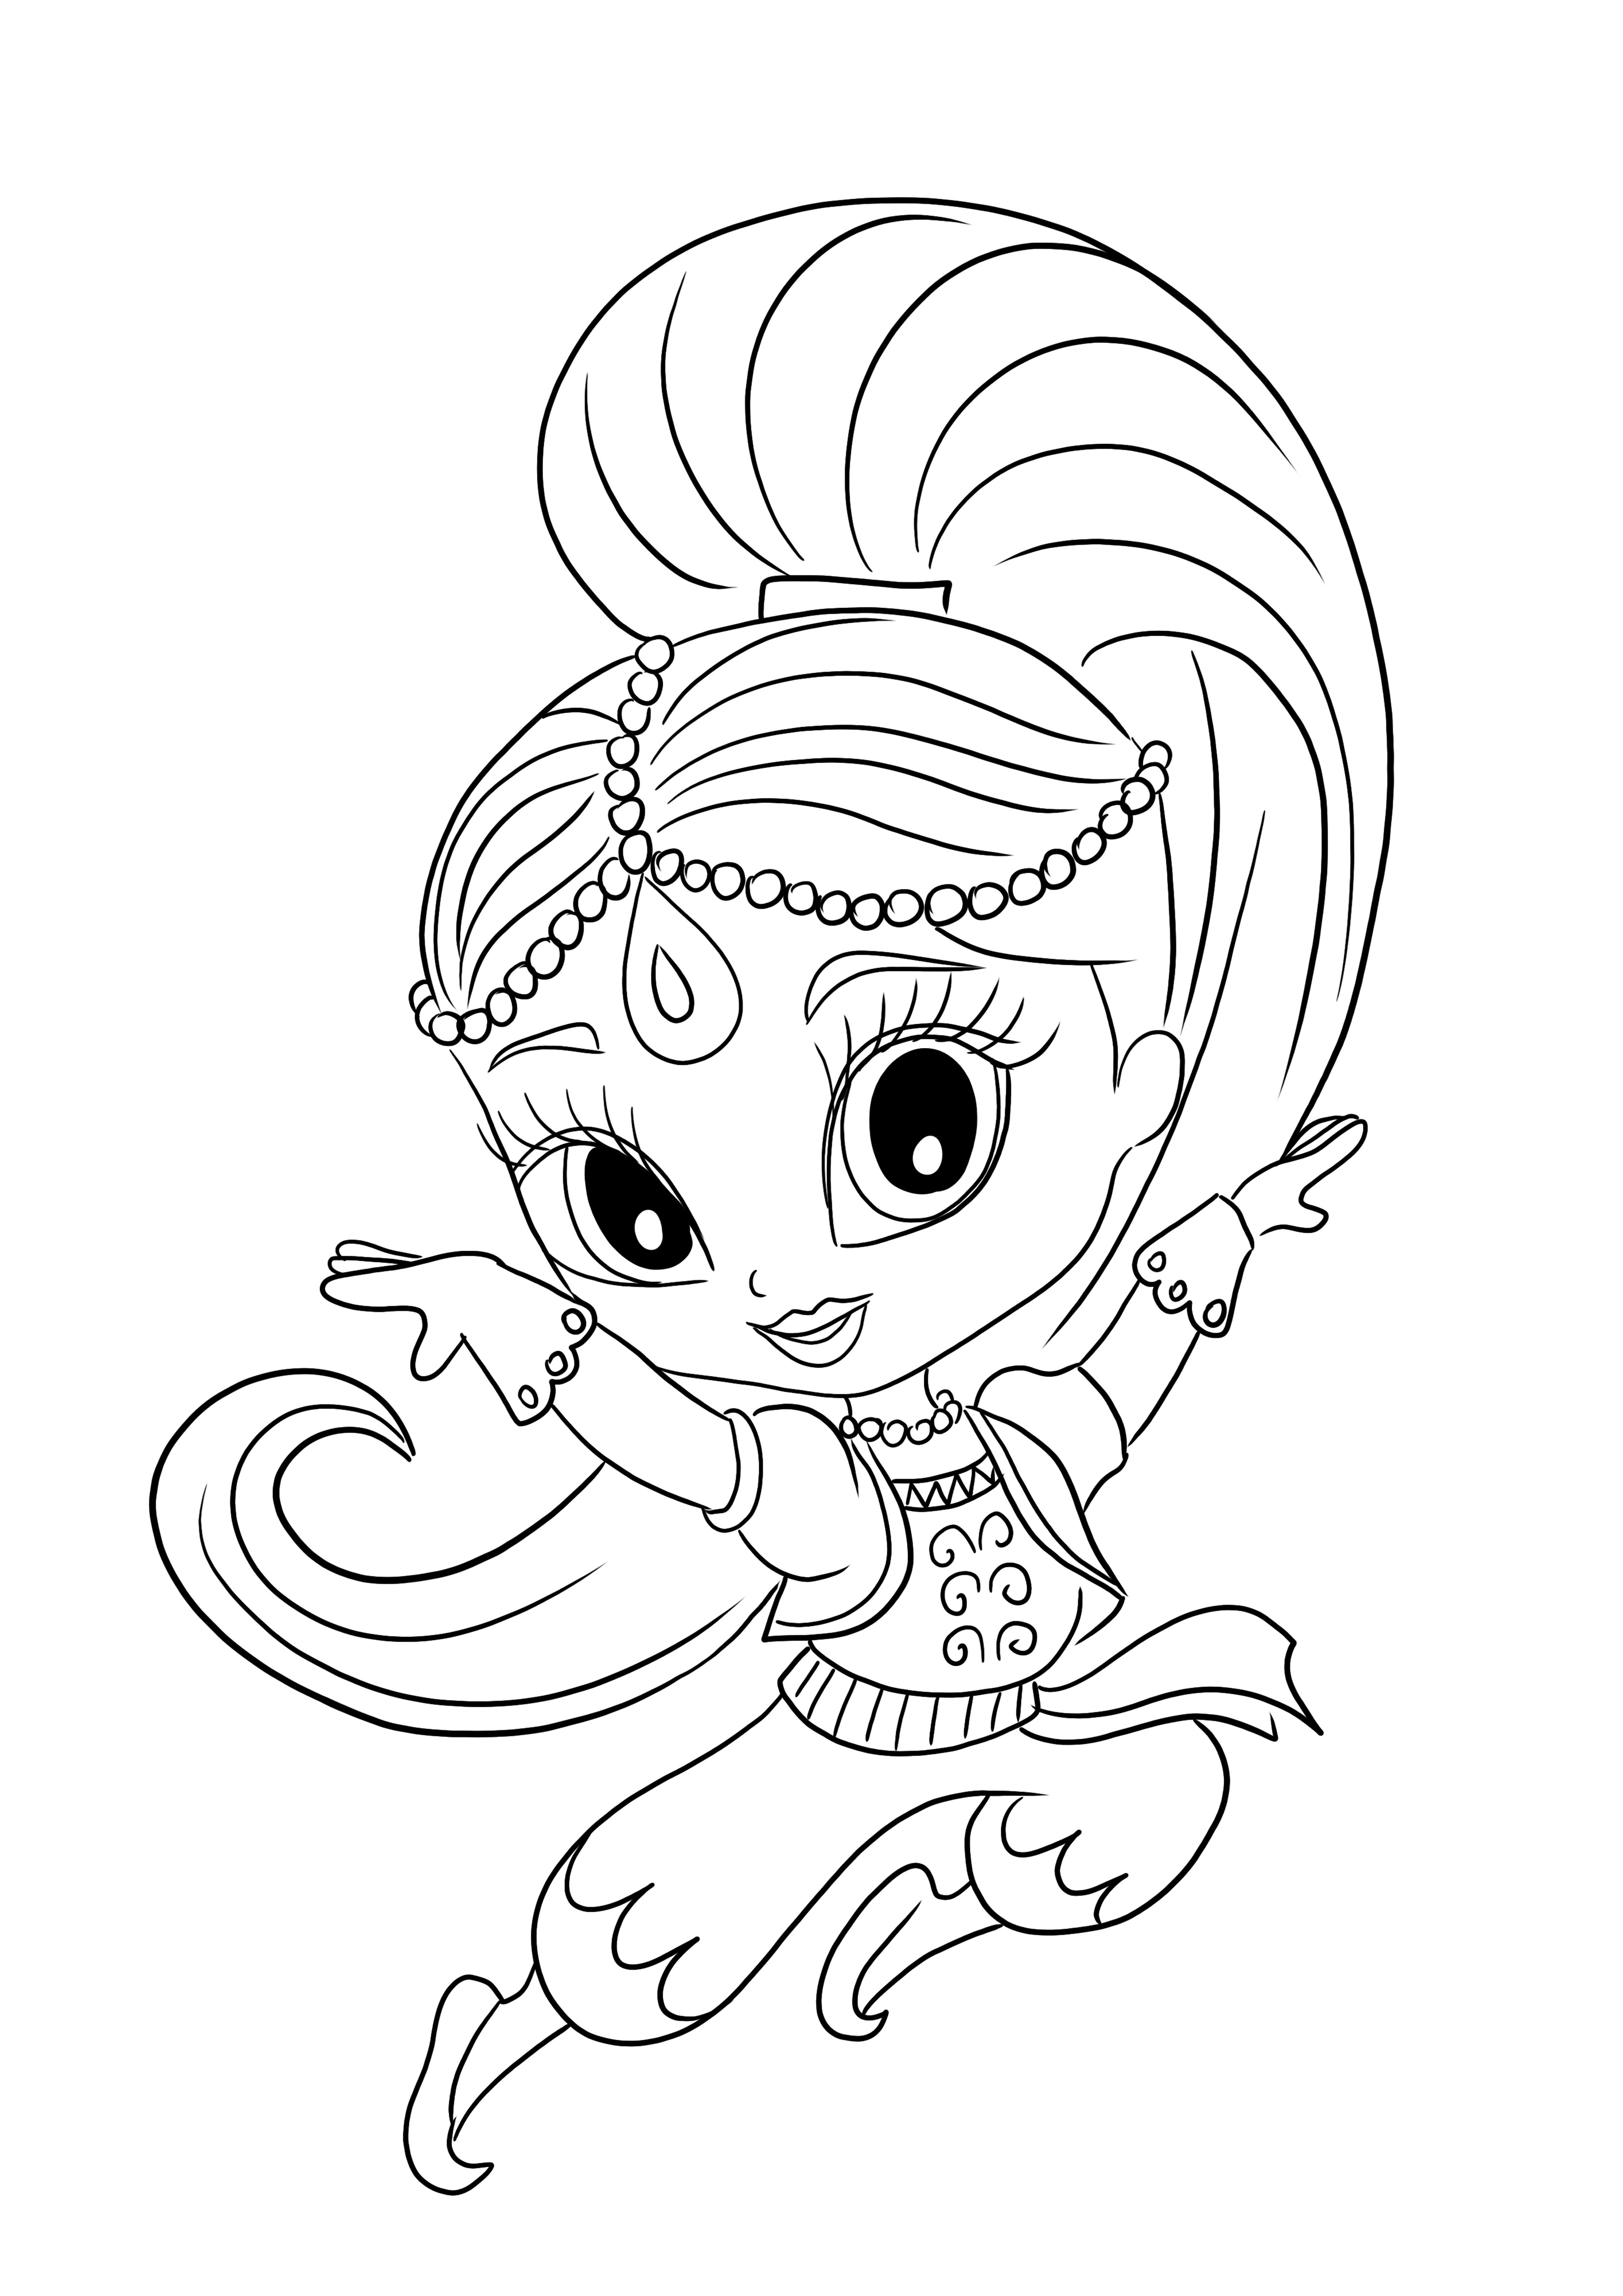 Happy Shimmer dancing is free to download or print and easy to color